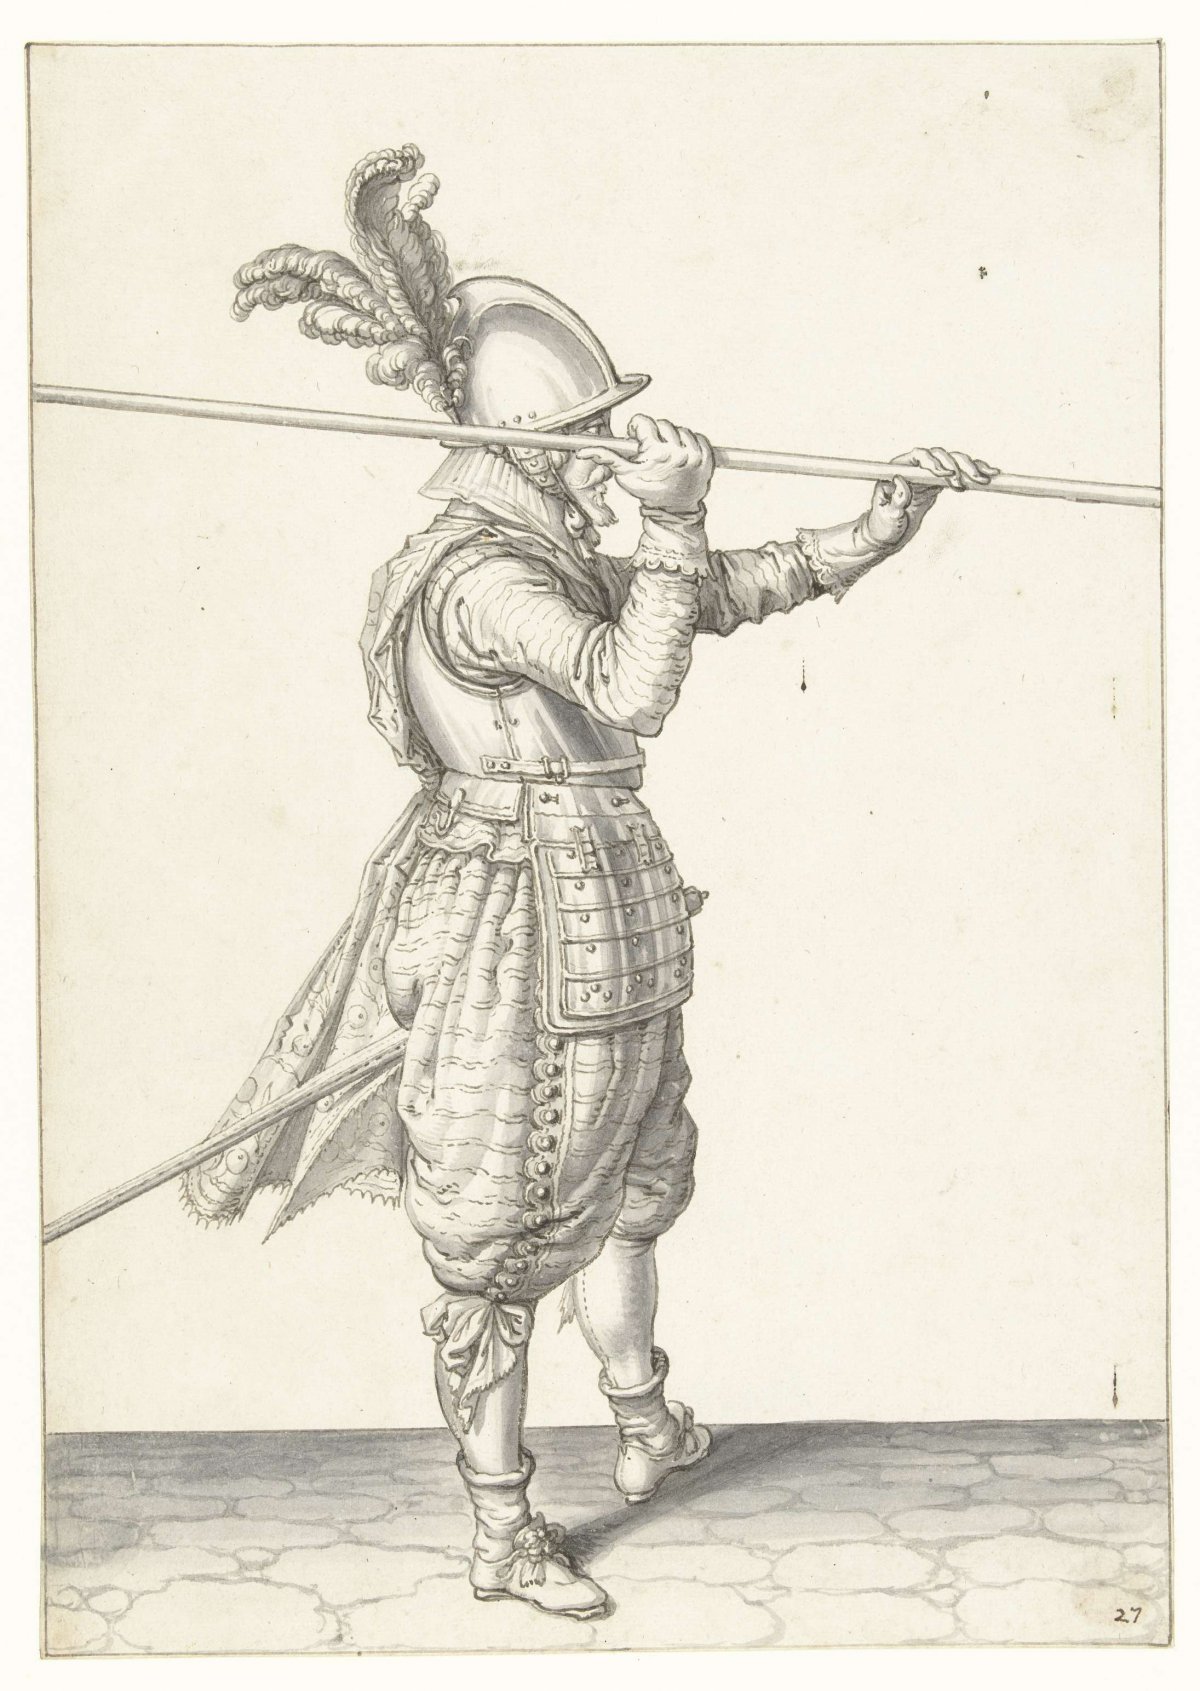 Soldier lifting his spear with both hands horizontally above his right shoulder, Jacques de Gheyn (II), 1596 - 1606